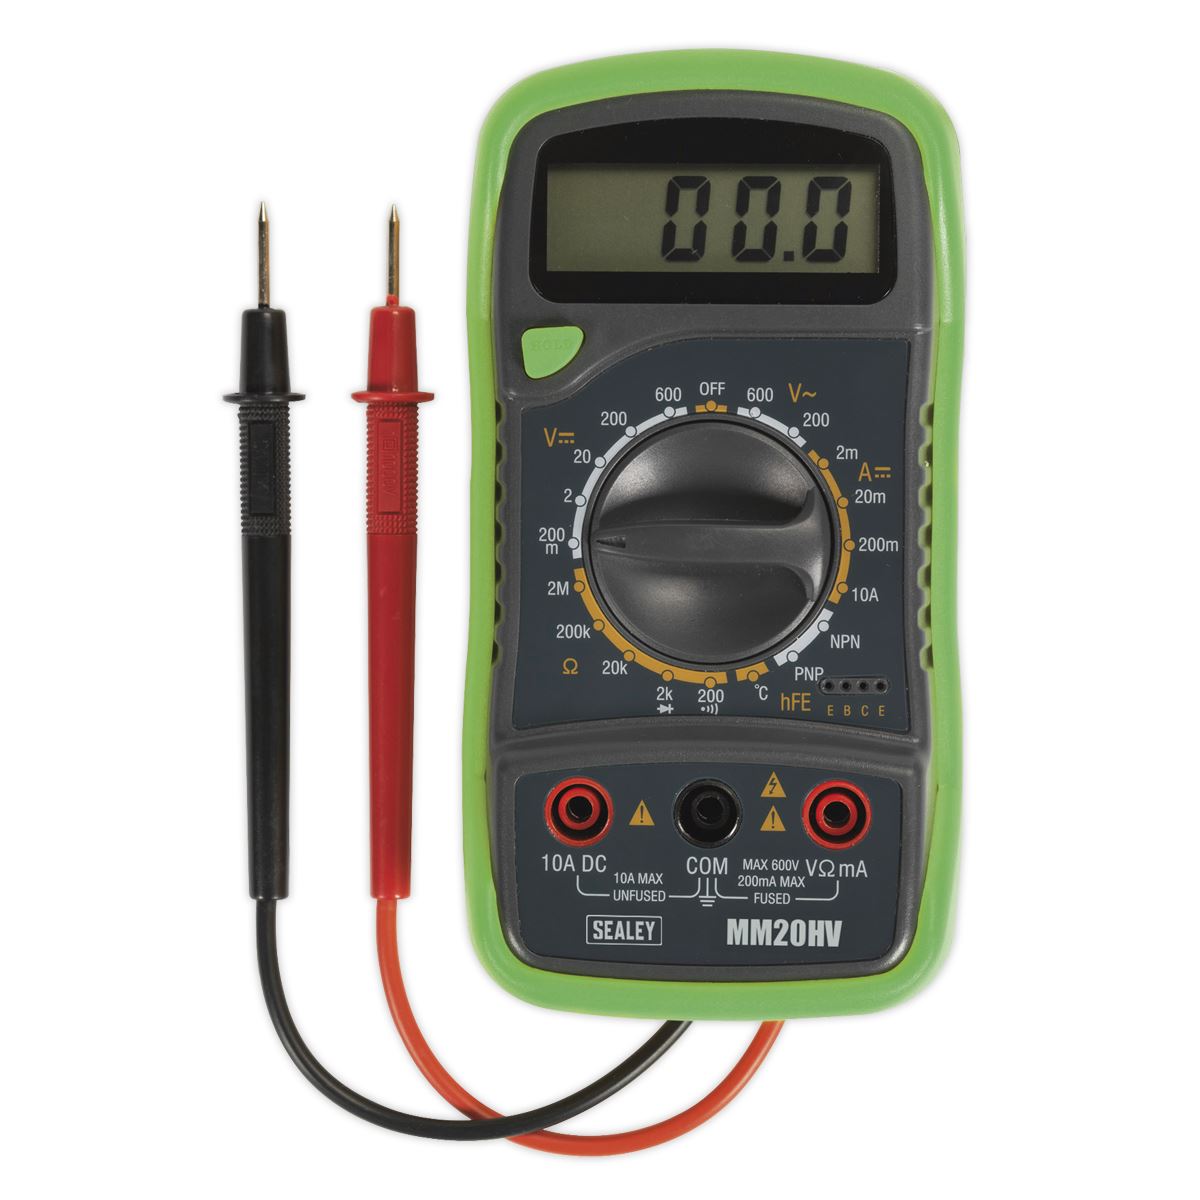 Sealey 8 Function Digital Multimeter with Thermocouple HV AC DC Current